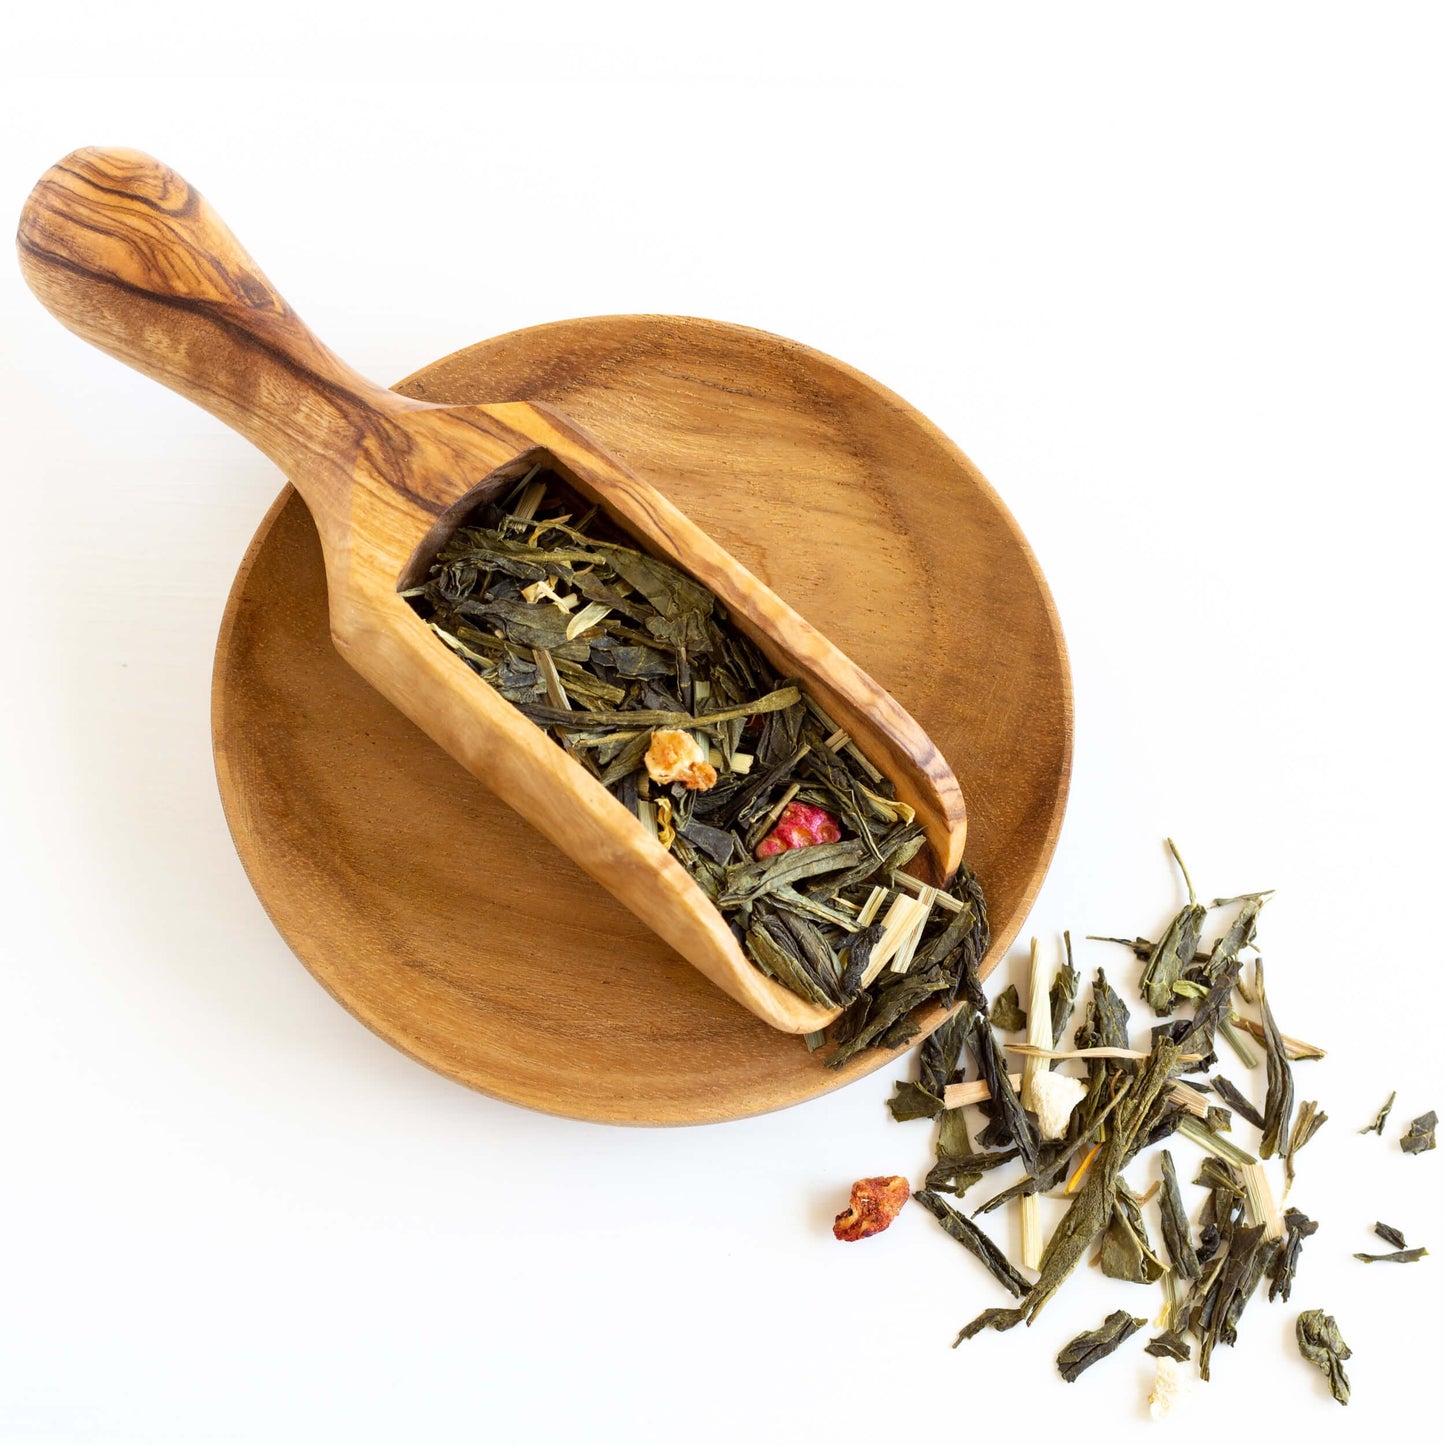 Sunrise Melody Organic Green Tea shown from above as loose tea leaves in a wooden scoop on a small wooden dish